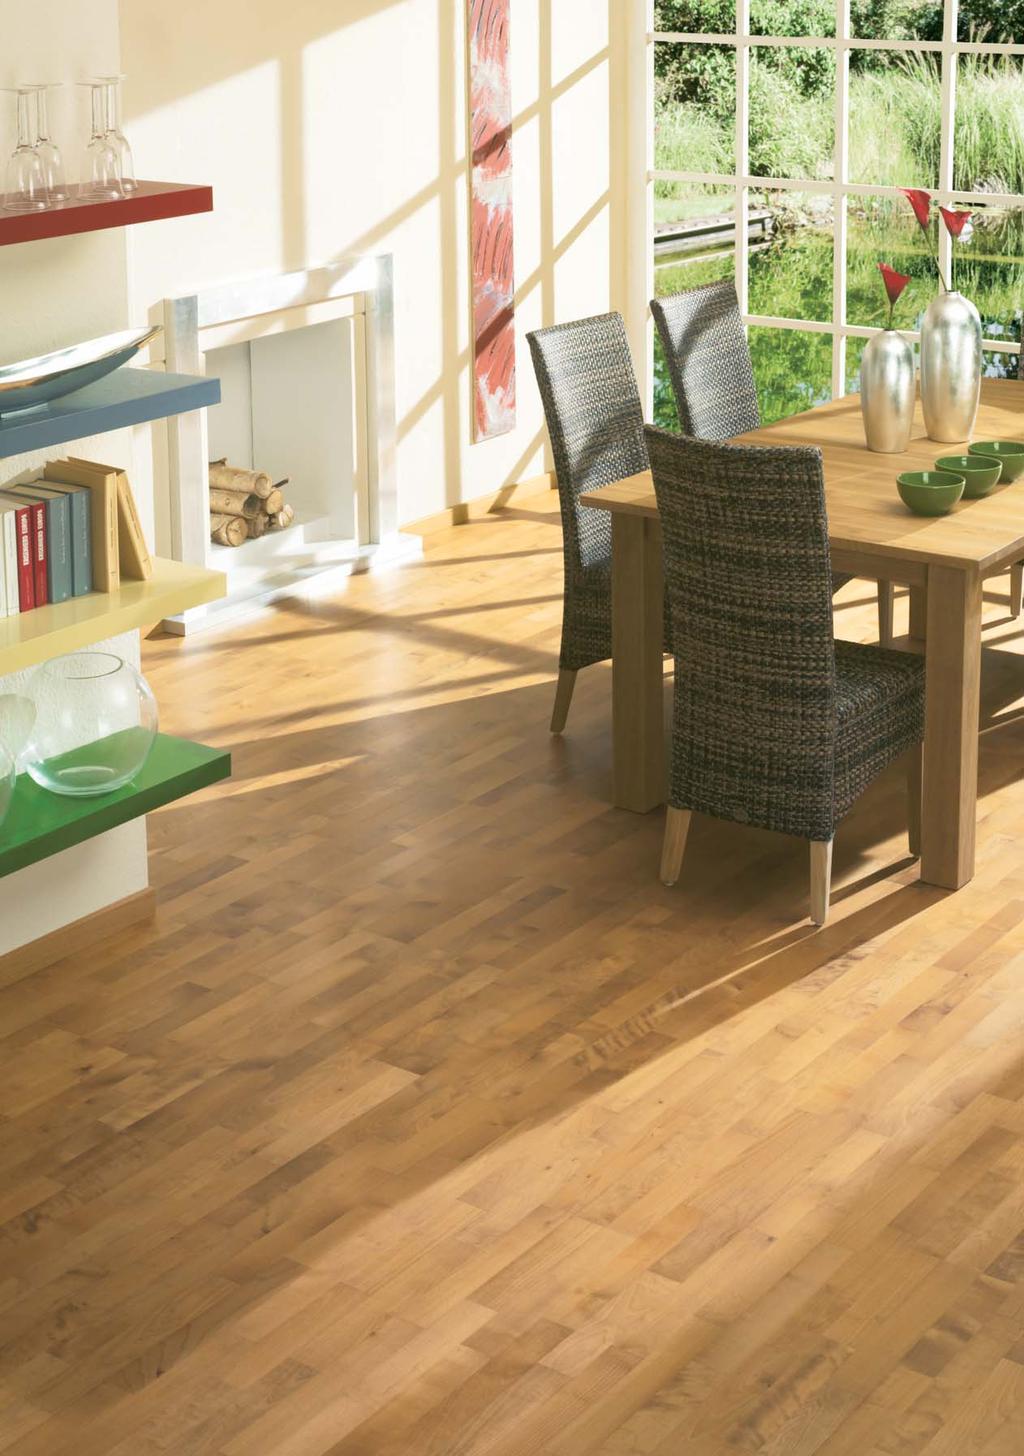 Burning hot floor design The Modern Home collection has been enlarged by a range of heat-treated floors, which